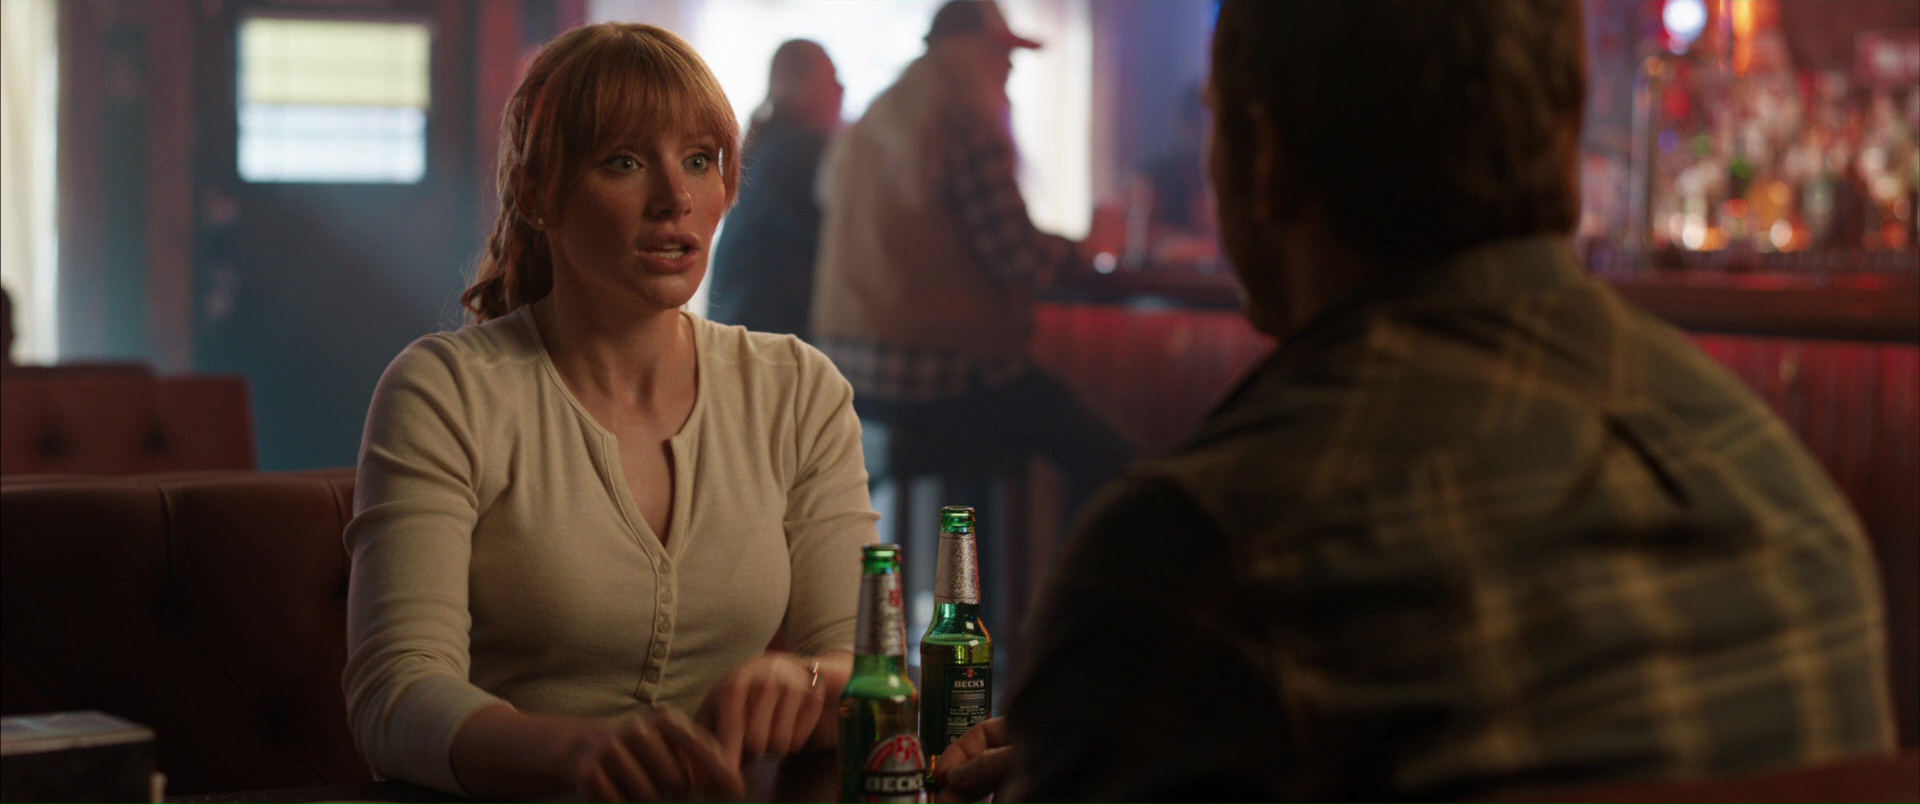 Beck's Beer Drunk by Bryce Dallas Howard in Jurassic World